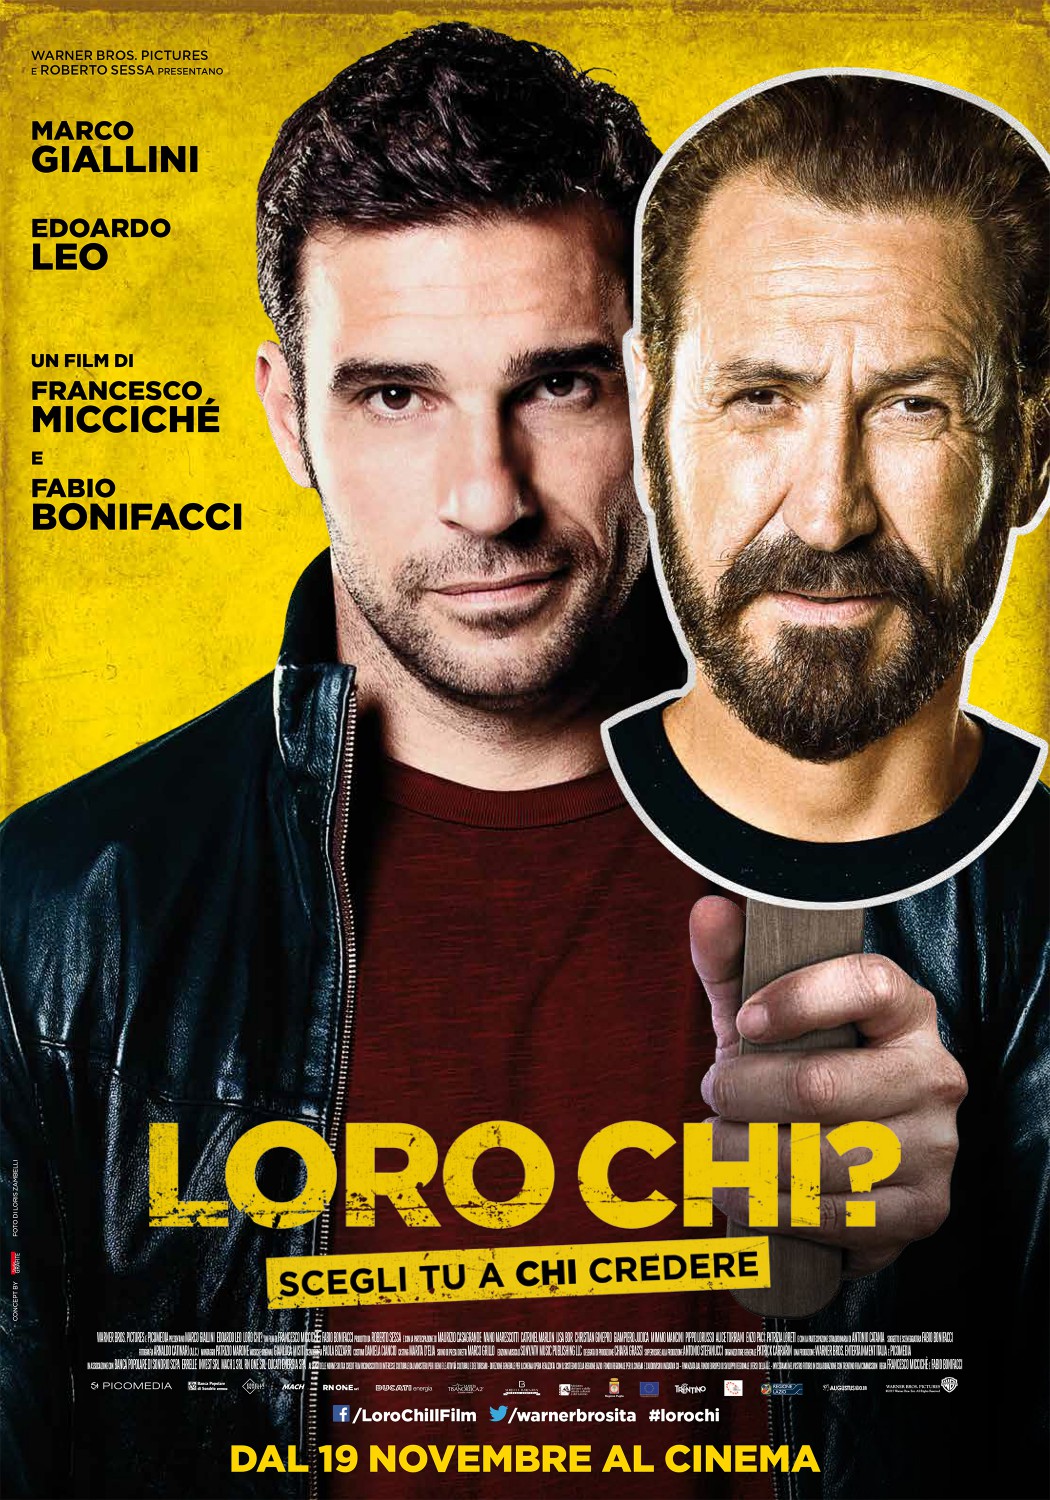 Extra Large Movie Poster Image for Loro chi? (#1 of 2)